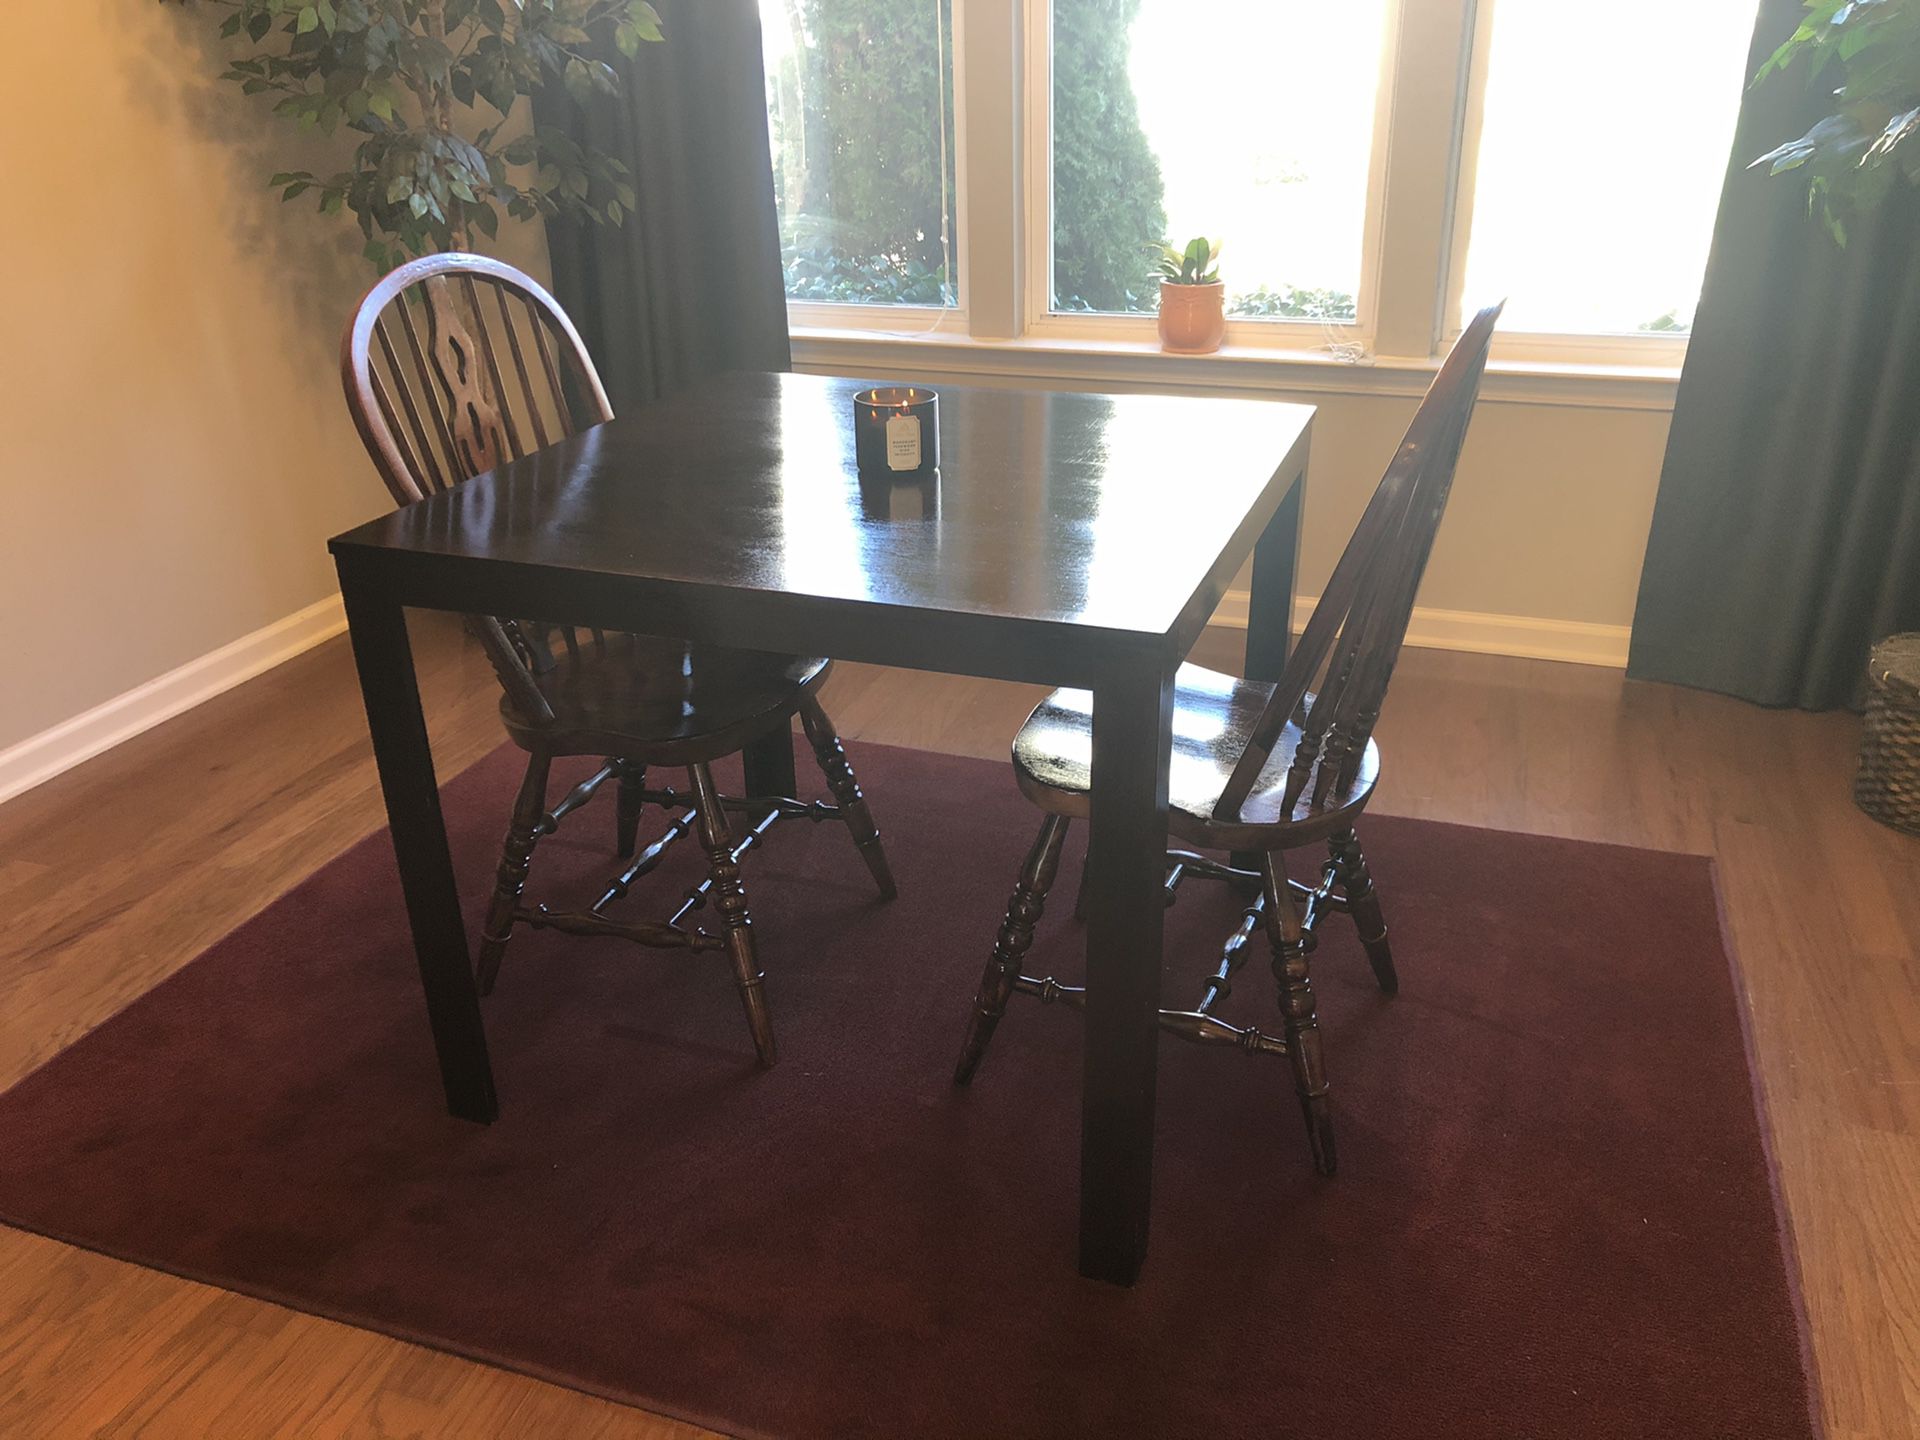 Beautiful Bombay Mahogany Stained Table & Chairs for Kitchen or Dining Room! Delivery available! 🚚